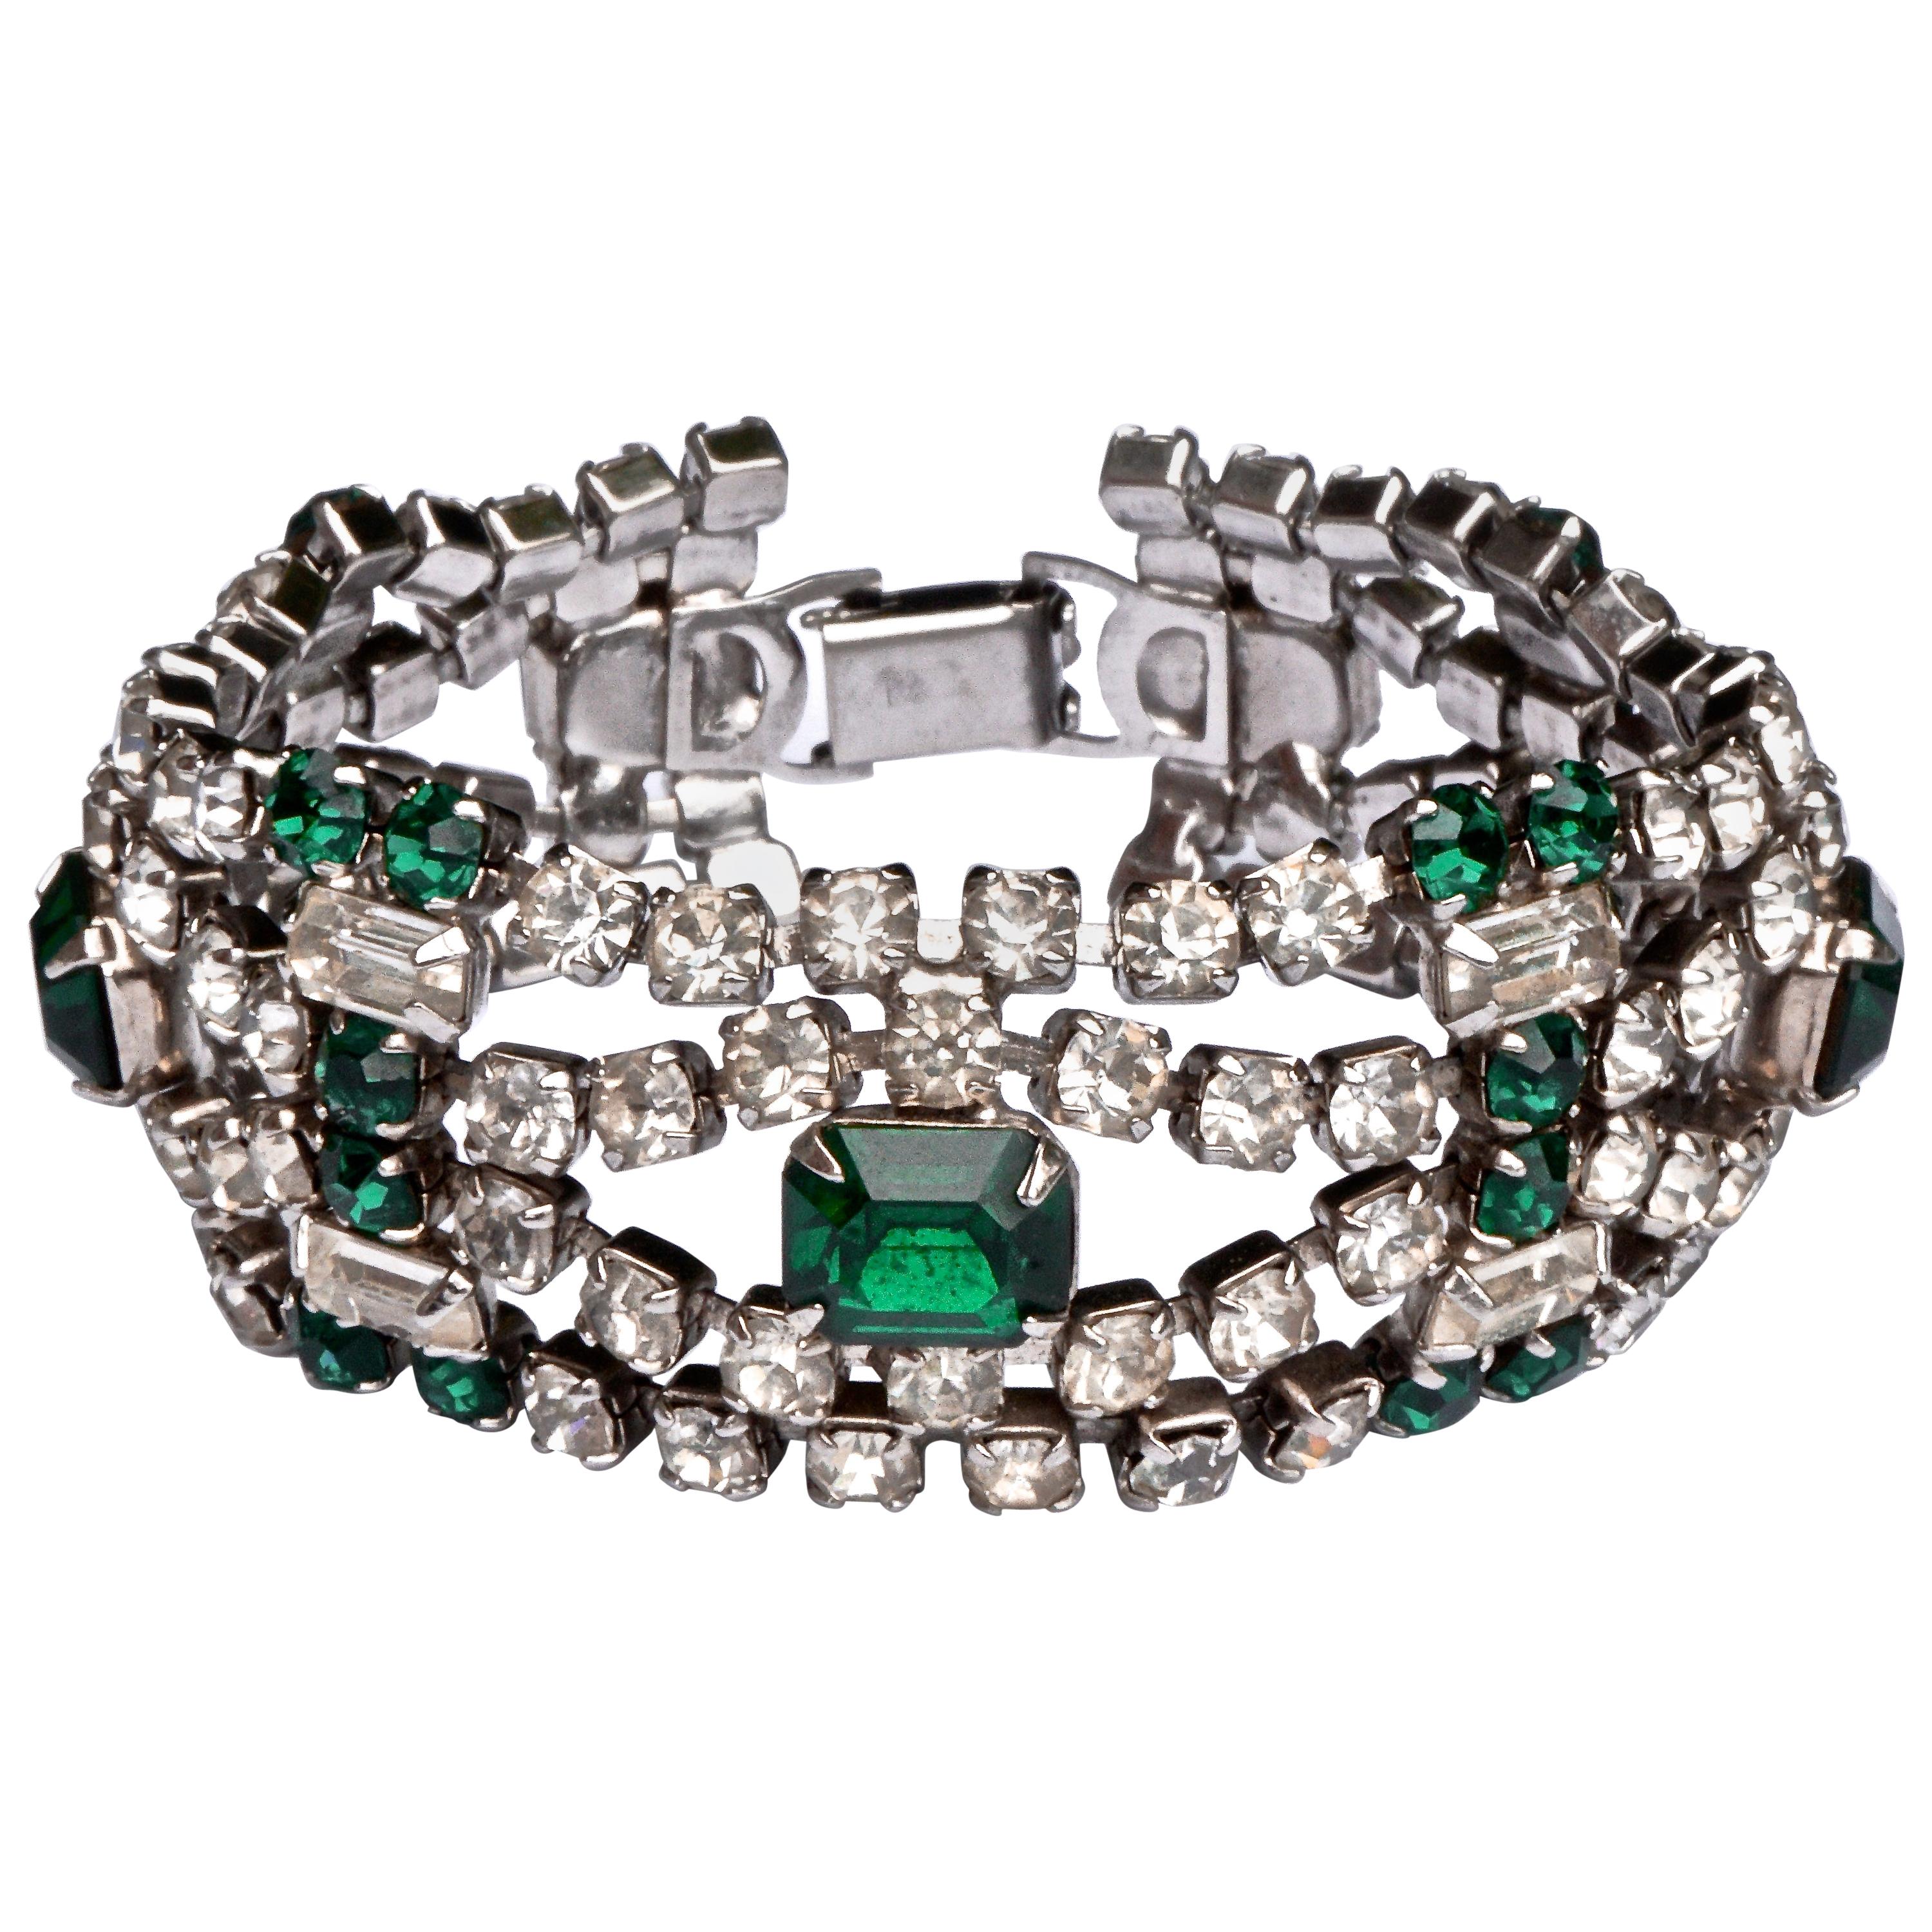 1950s Silver Tone Emerald Green and Clear Rhinestones Bracelet For Sale